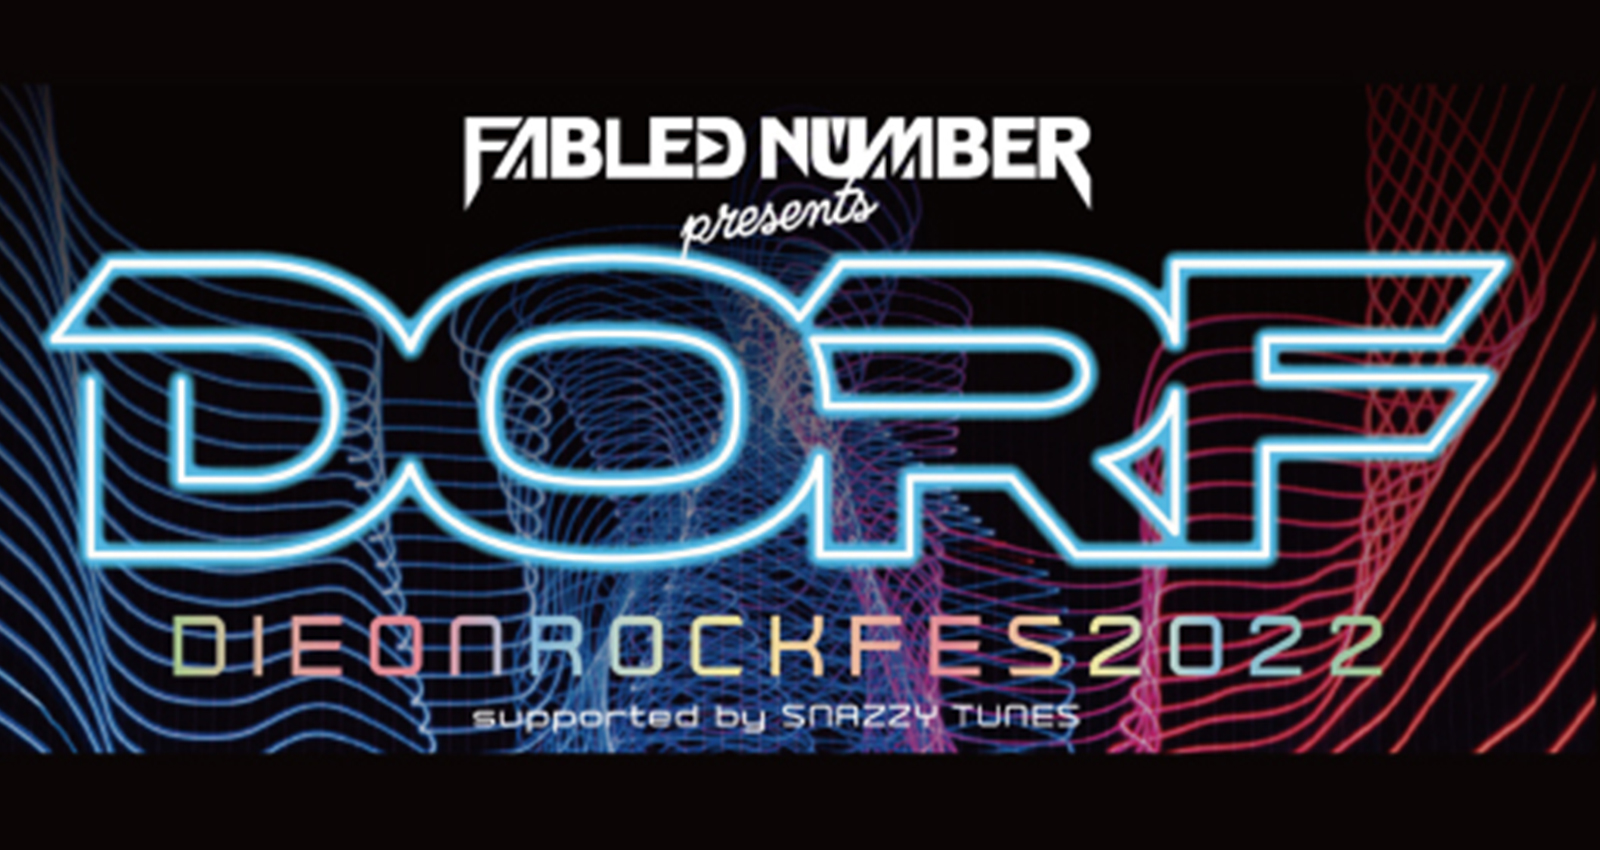 FABLED NUMBER presents『DIE ON ROCK FES 2022』 supported by SNAZZY TUNES